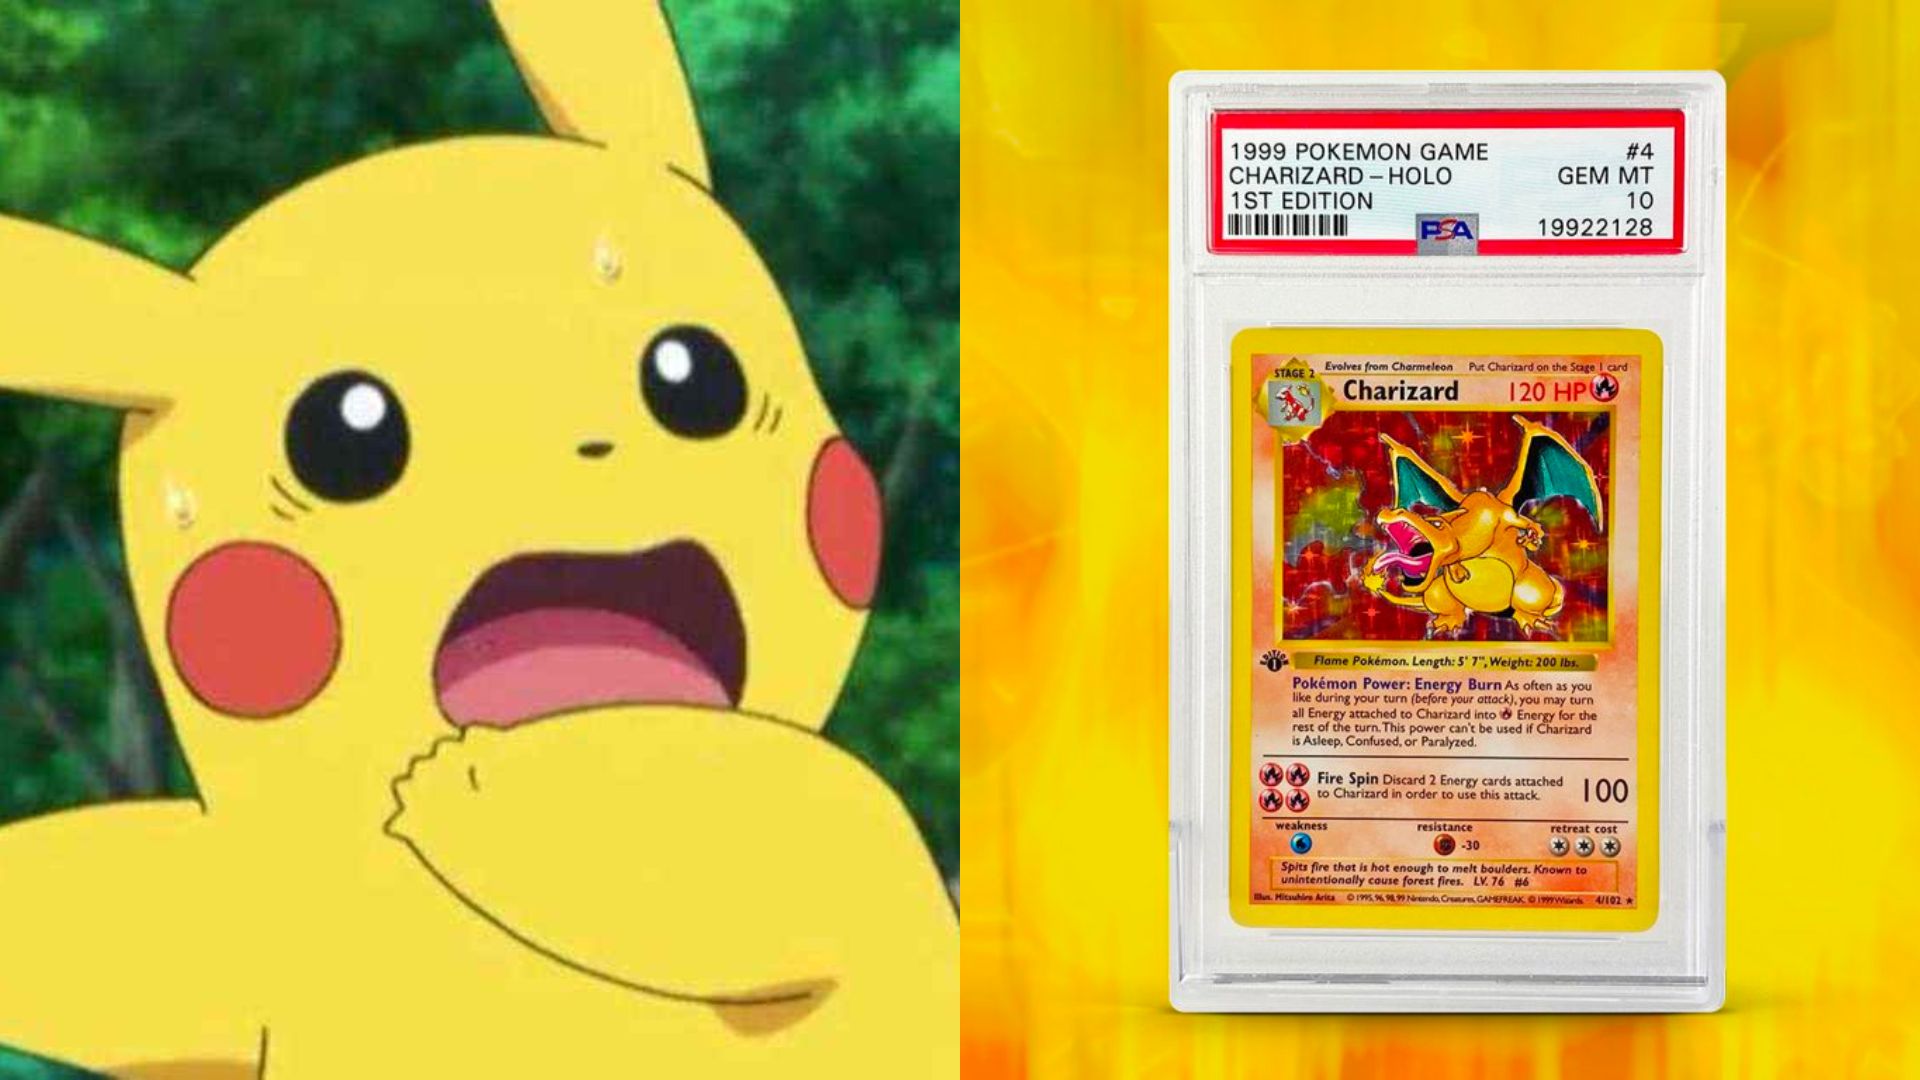 The original Pokémon? A visual (ancient) history of trading cards